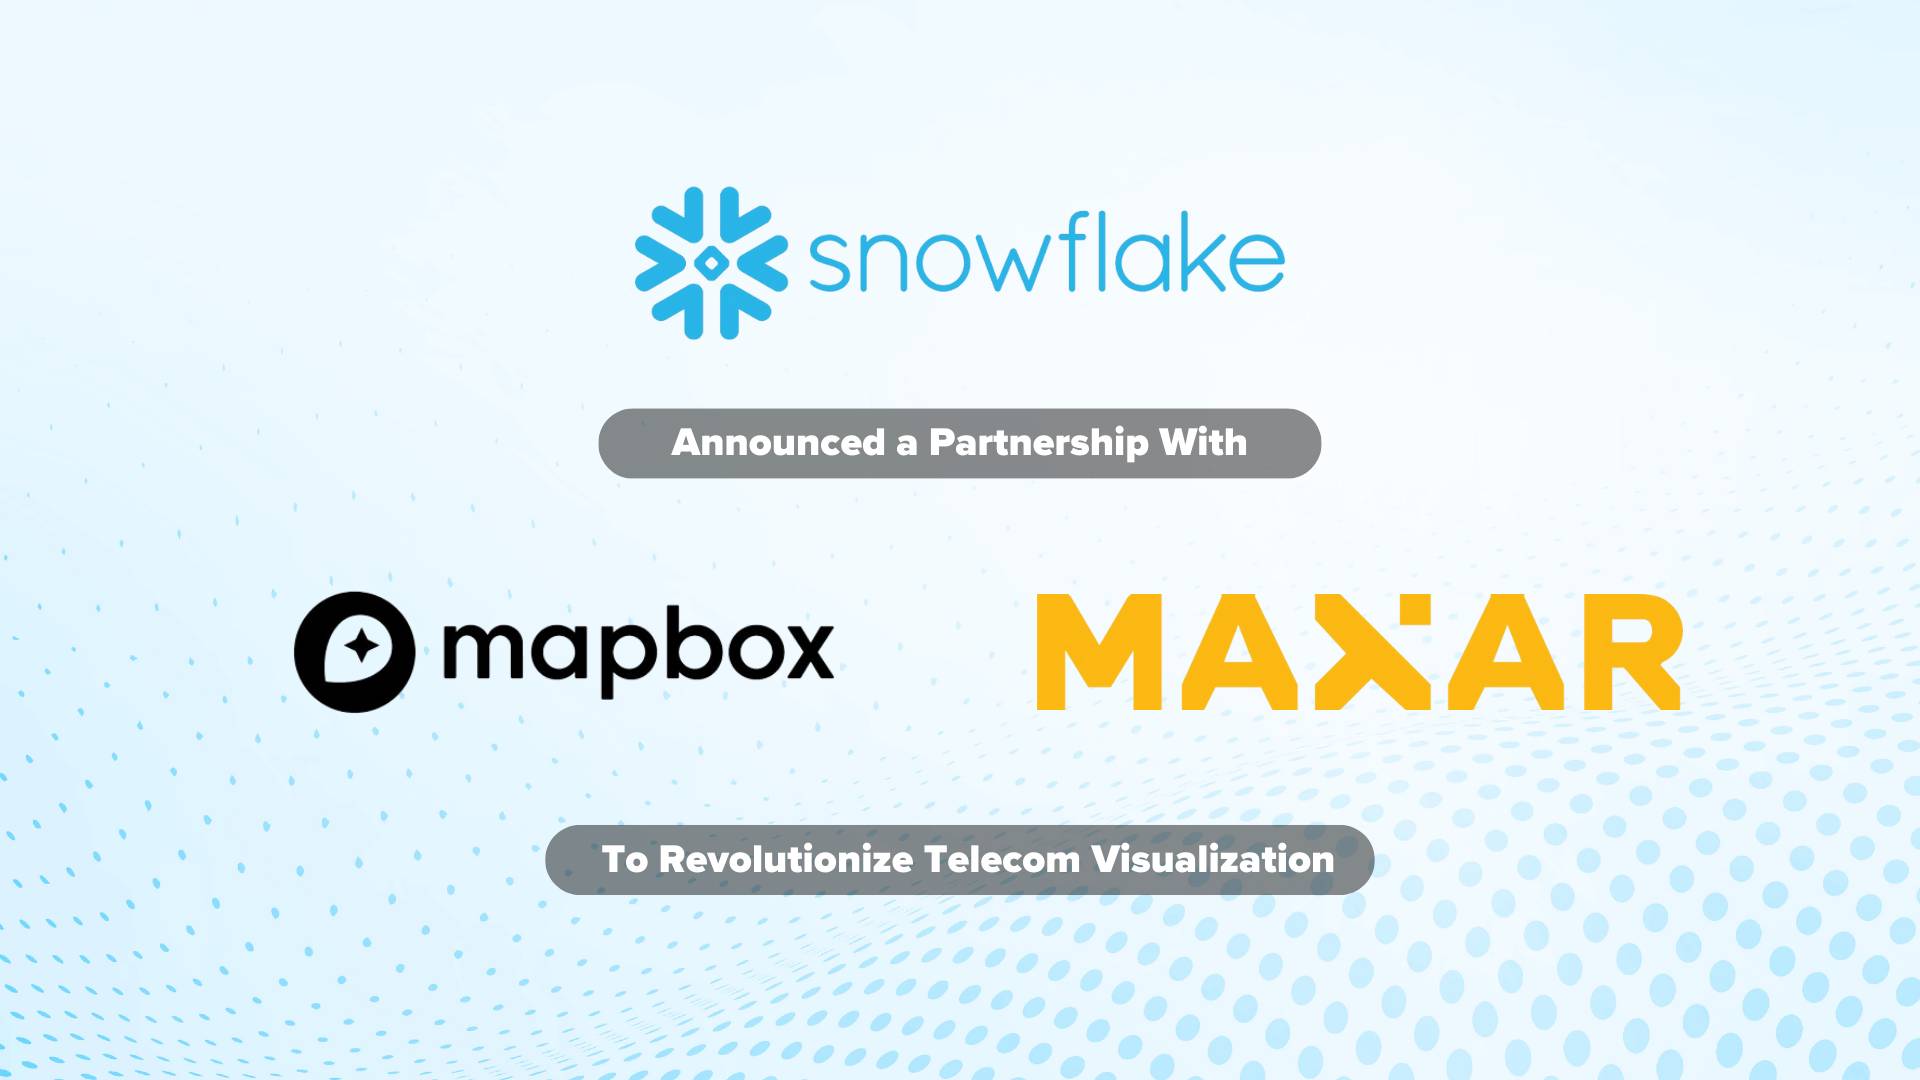 Mapbox Unveils Digital Twin in Partnership with Snowflake and Maxar to Revolutionize Telecom Visualization